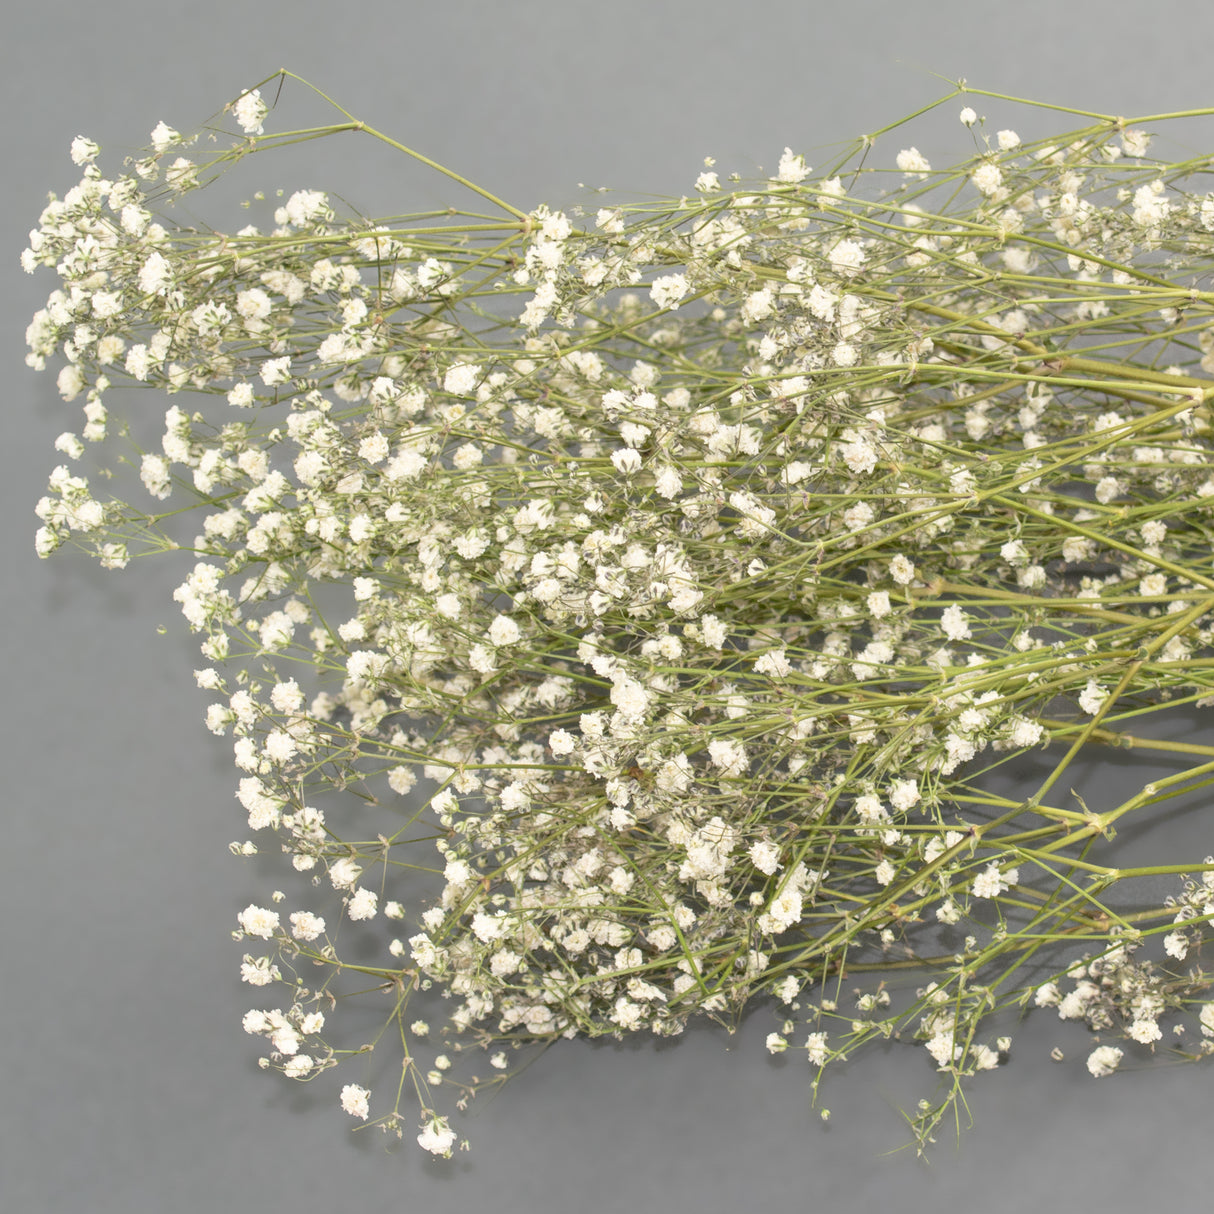 This is an image of a bunch of preserved white gypsophila on a white background.